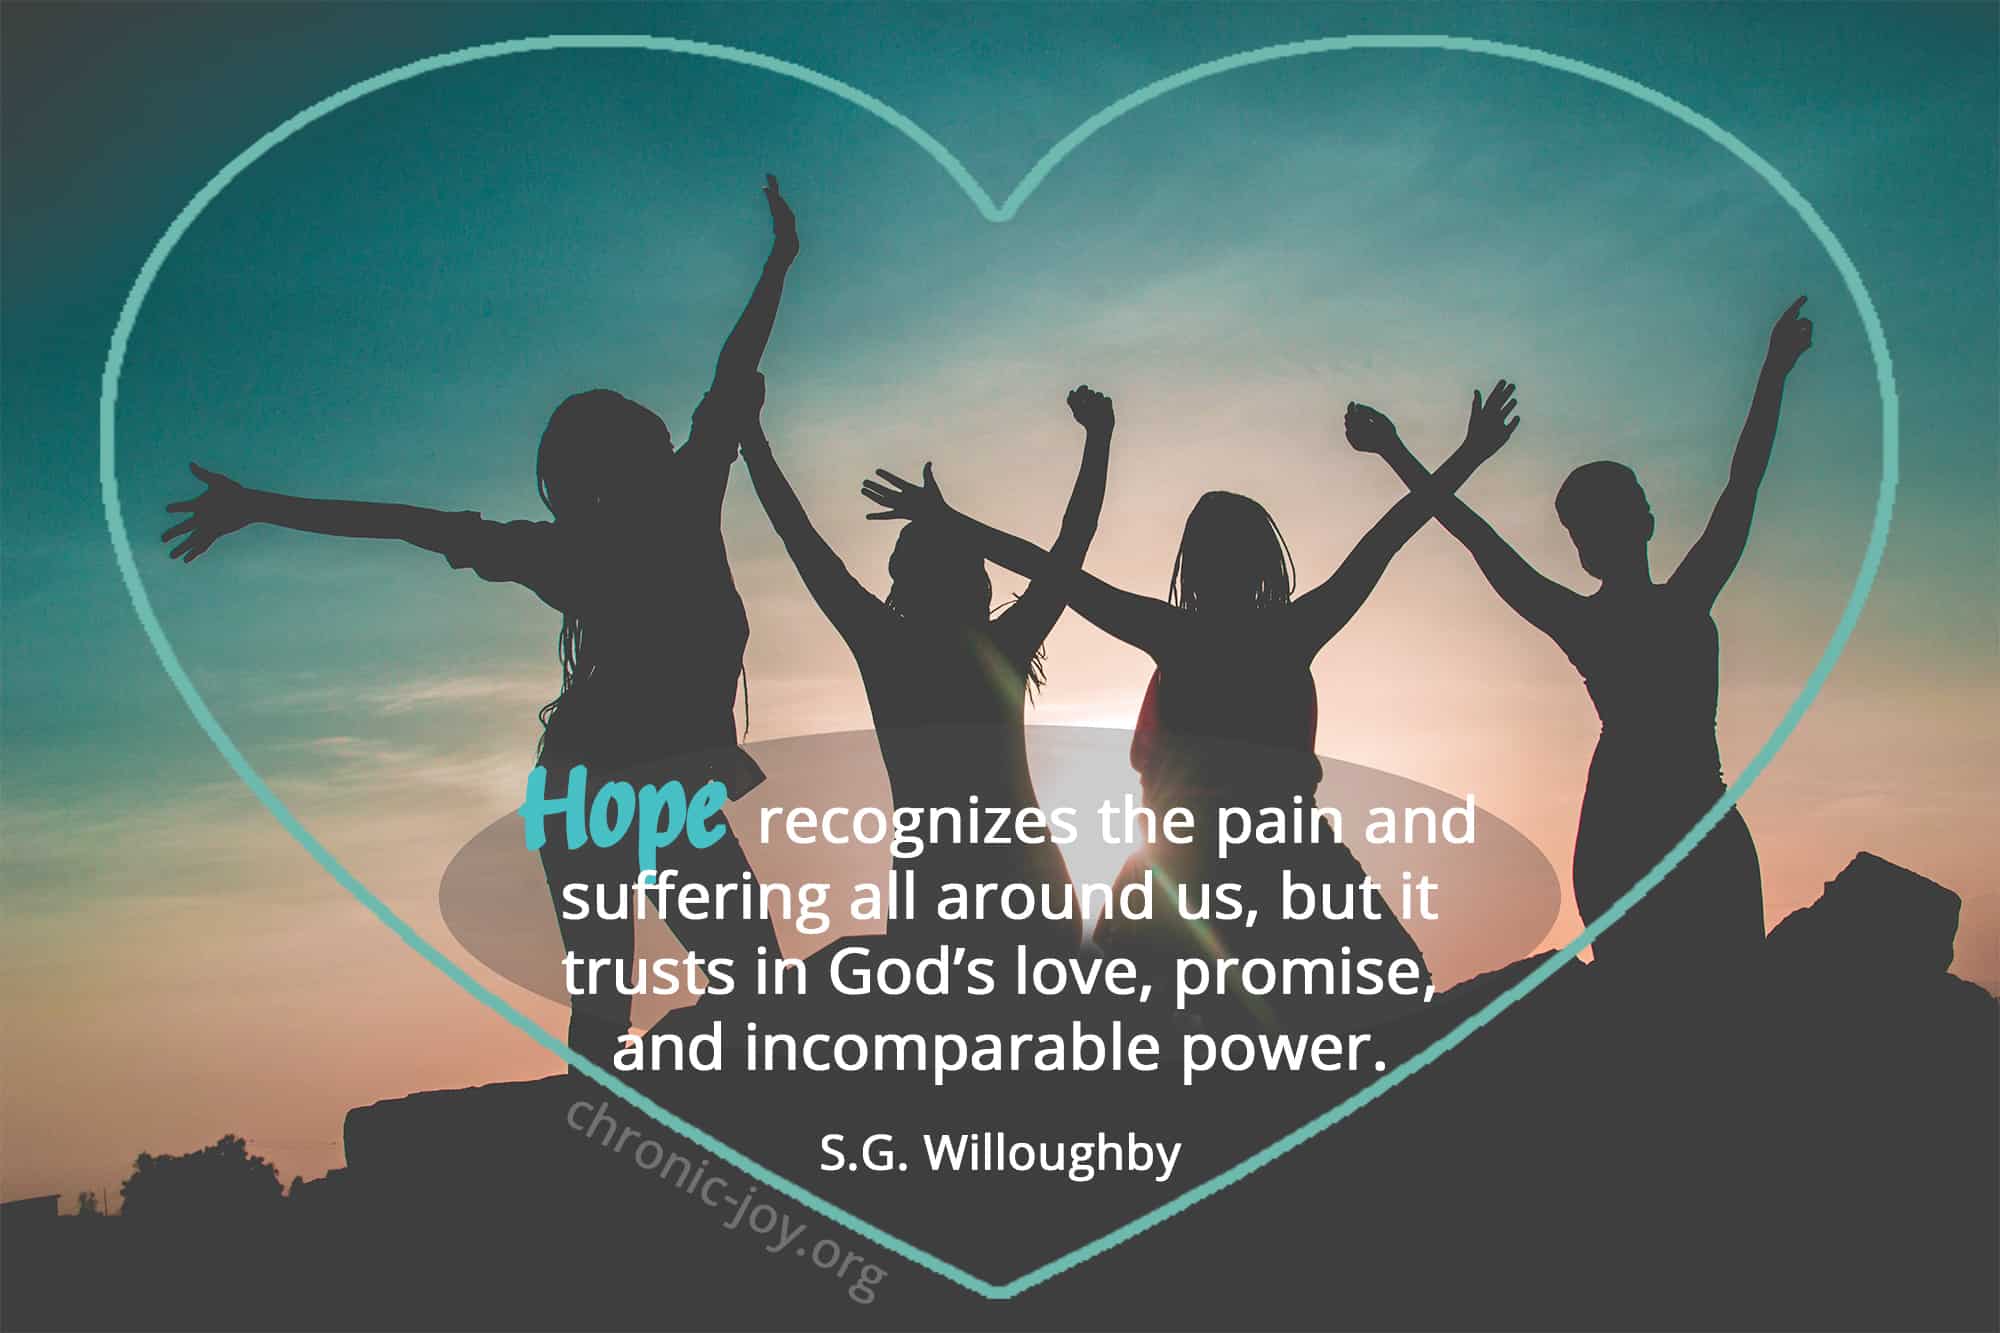 Hope recognizes the pain and suffering all around us, but it trusts in God’s love, promise,and incomparable power. ~ S.G. Willoughby